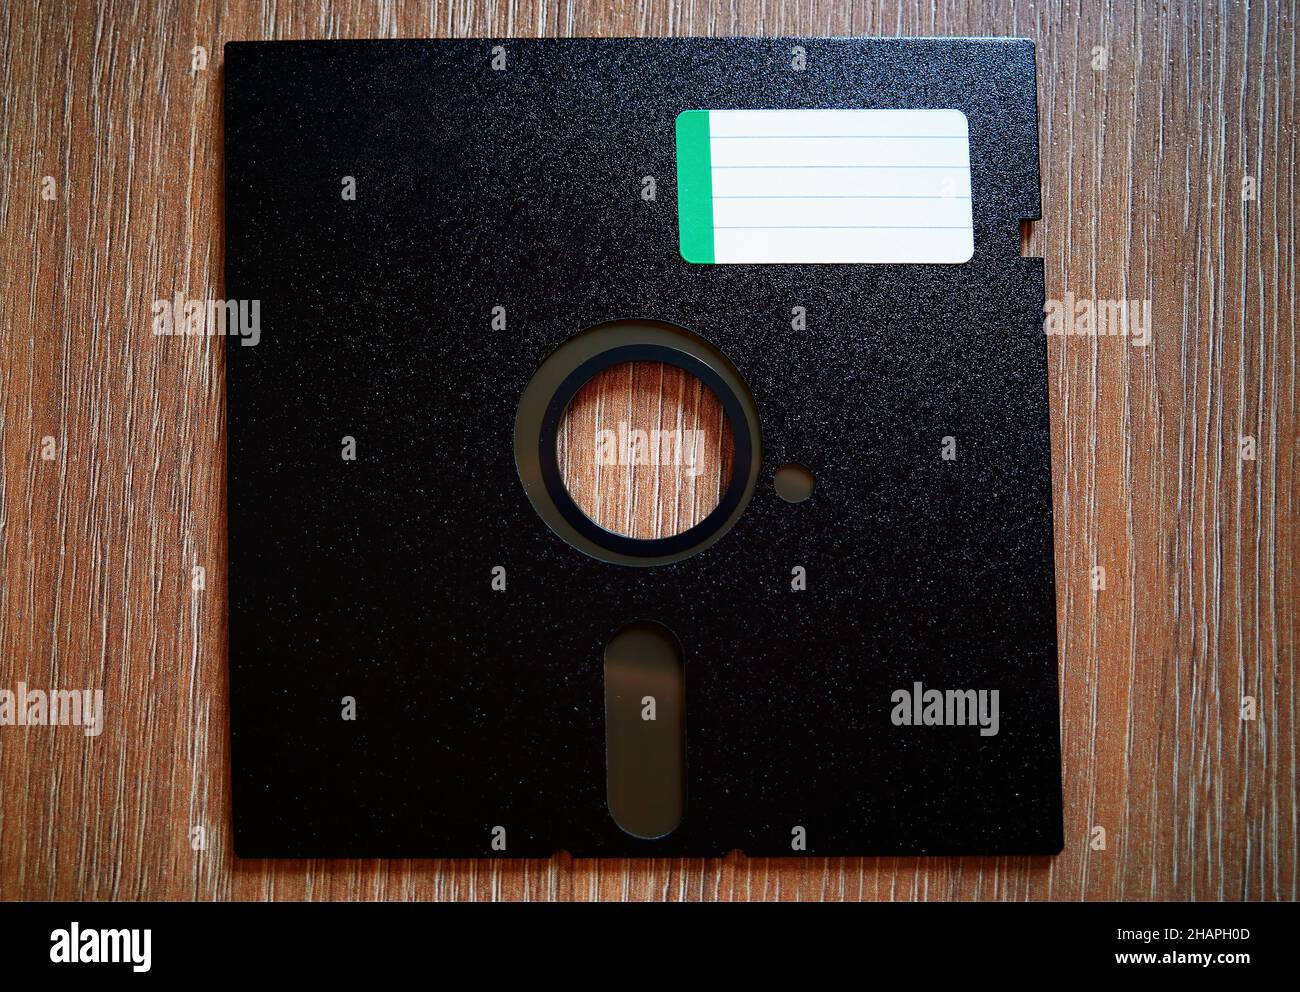 Floppy disc with green label background Stock Photo